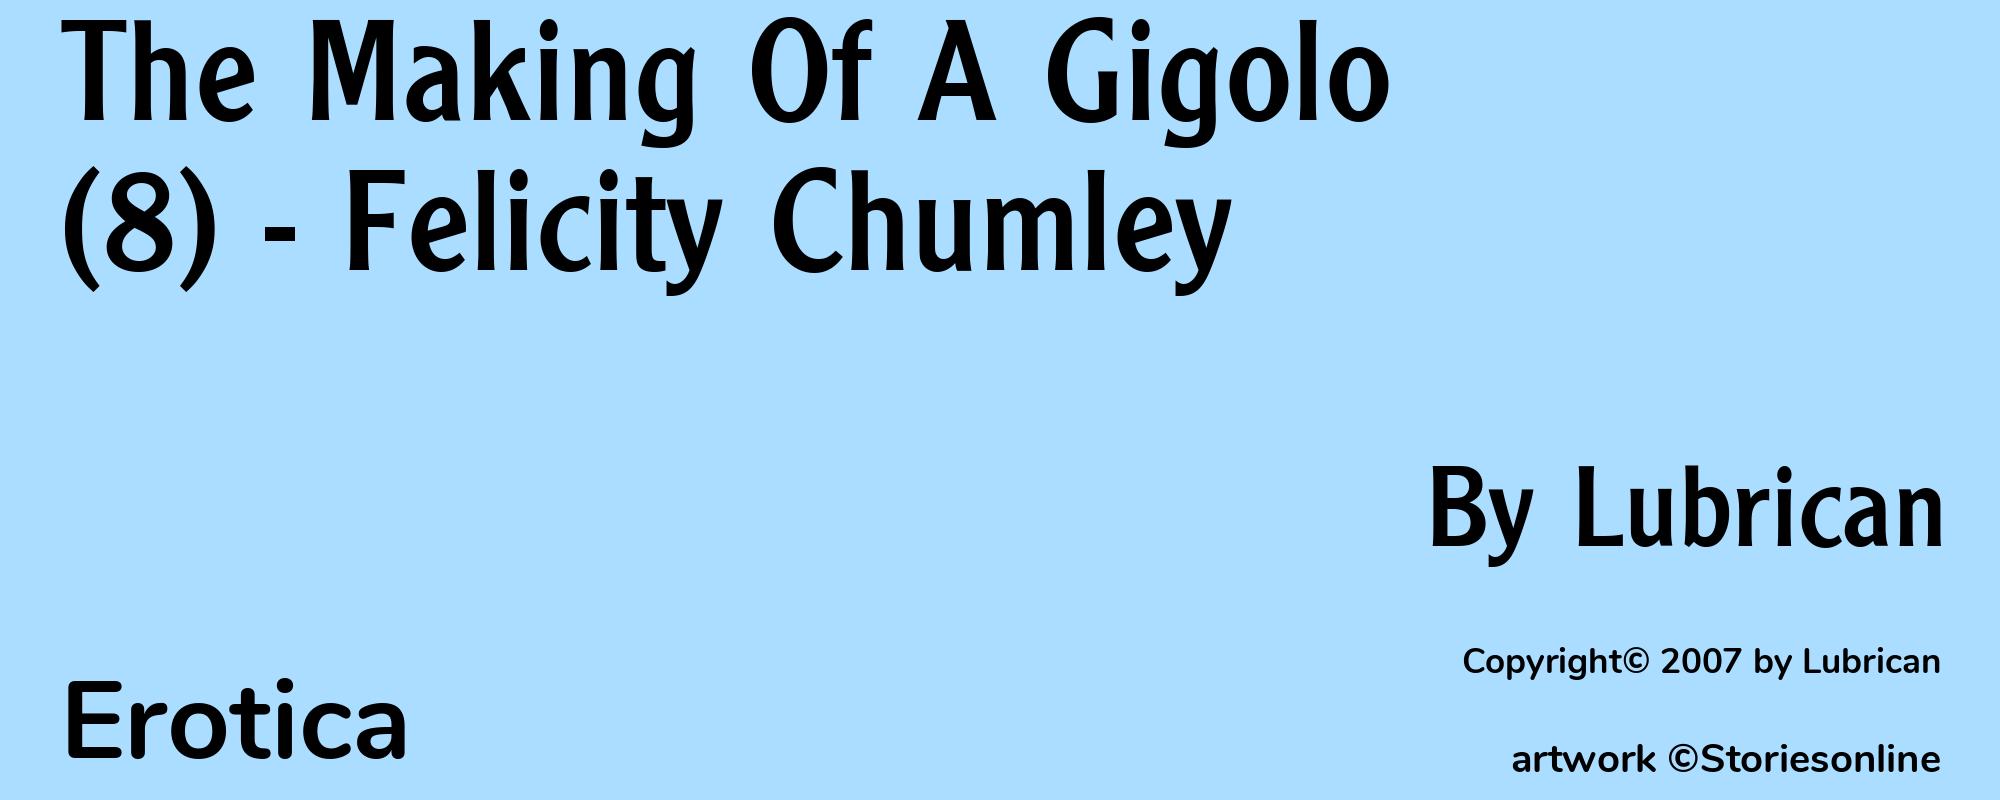 The Making Of A Gigolo (8) - Felicity Chumley - Cover